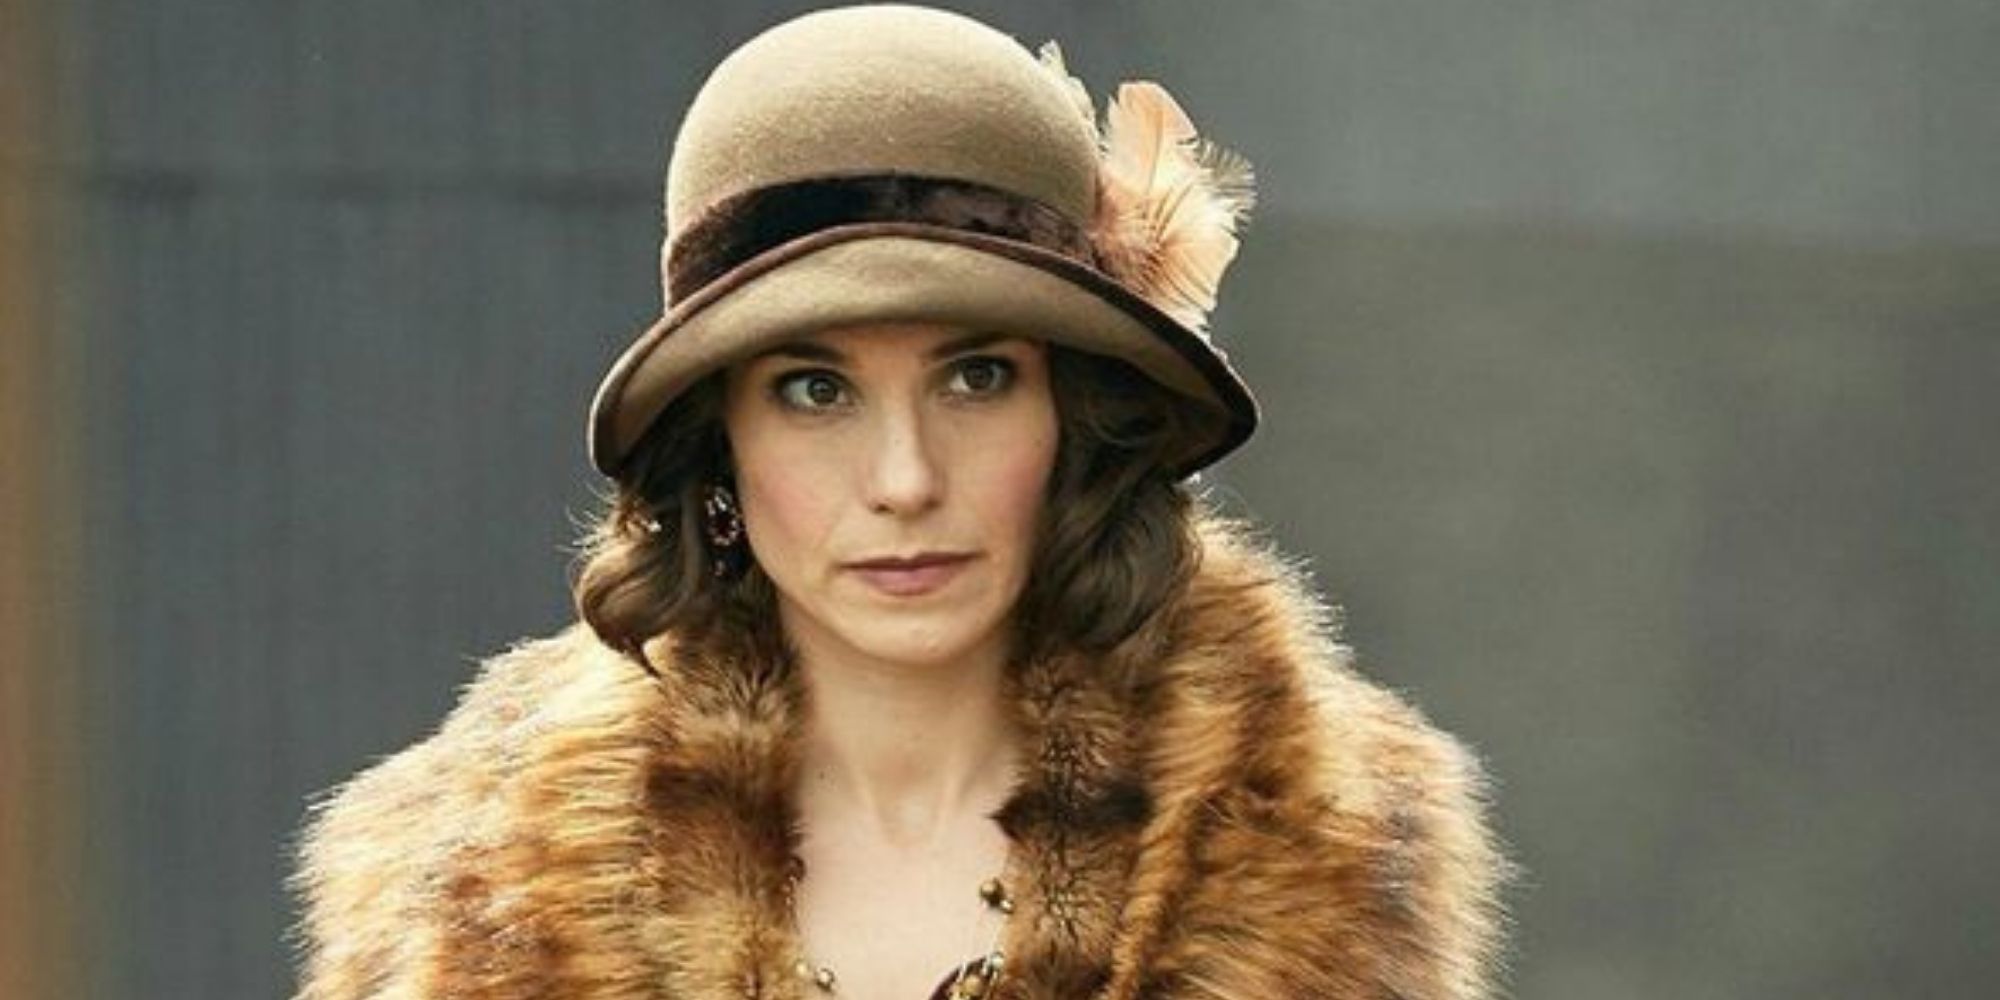 The character May Carleton from Peaky Blinders.